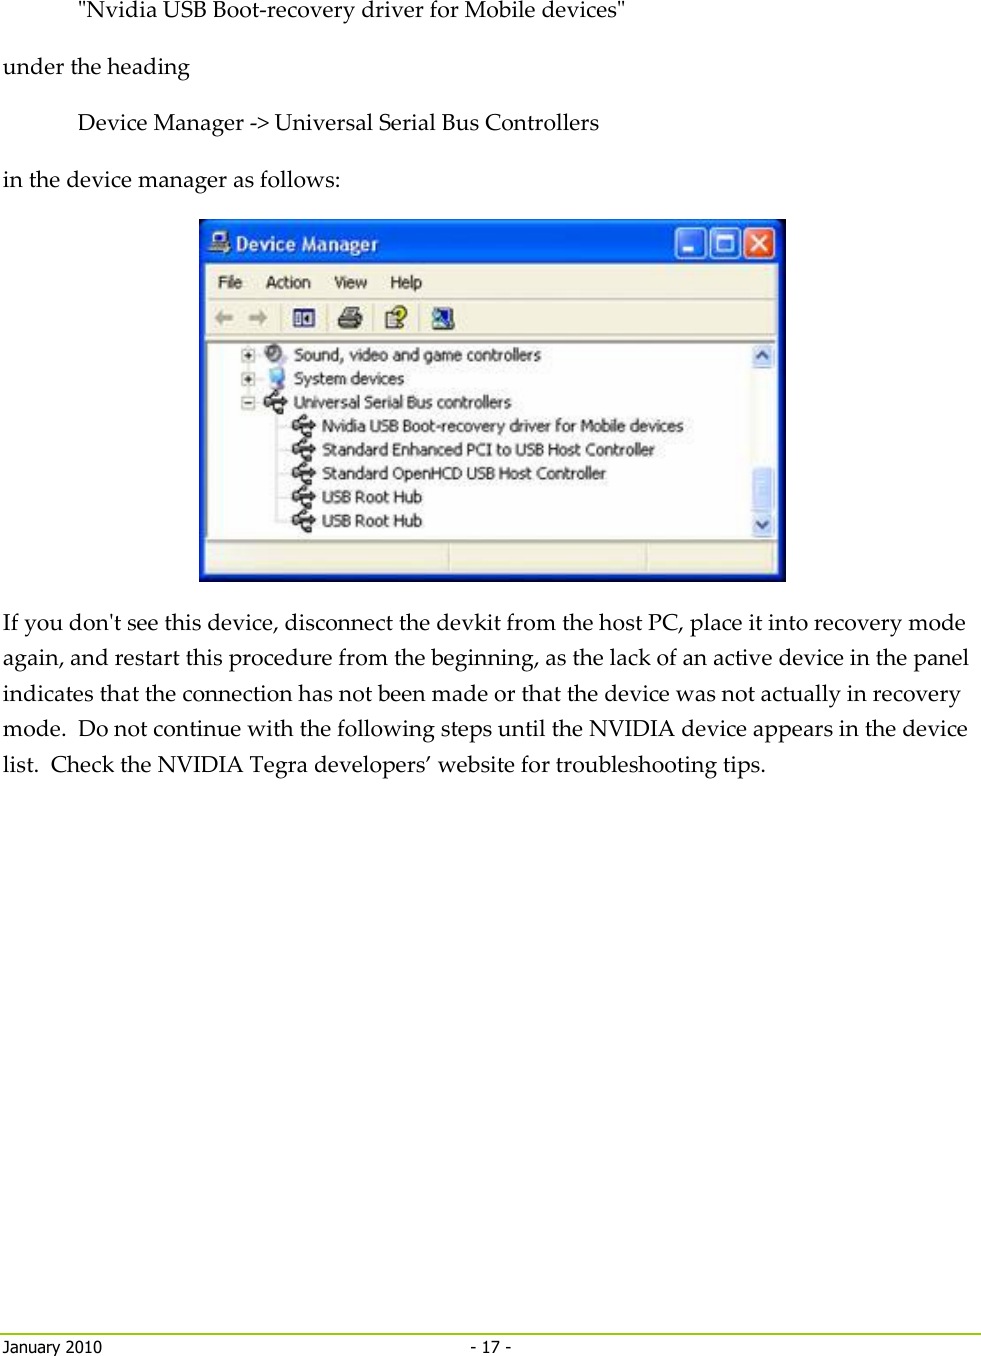     January 2010  - 17 -   &quot;Nvidia USB Boot-recovery driver for Mobile devices&quot;  under the heading Device Manager -&gt; Universal Serial Bus Controllers in the device manager as follows:  If you don&apos;t see this device, disconnect the devkit from the host PC, place it into recovery mode again, and restart this procedure from the beginning, as the lack of an active device in the panel indicates that the connection has not been made or that the device was not actually in recovery mode.  Do not continue with the following steps until the NVIDIA device appears in the device list.  Check the NVIDIA Tegra developers’ website for troubleshooting tips.   